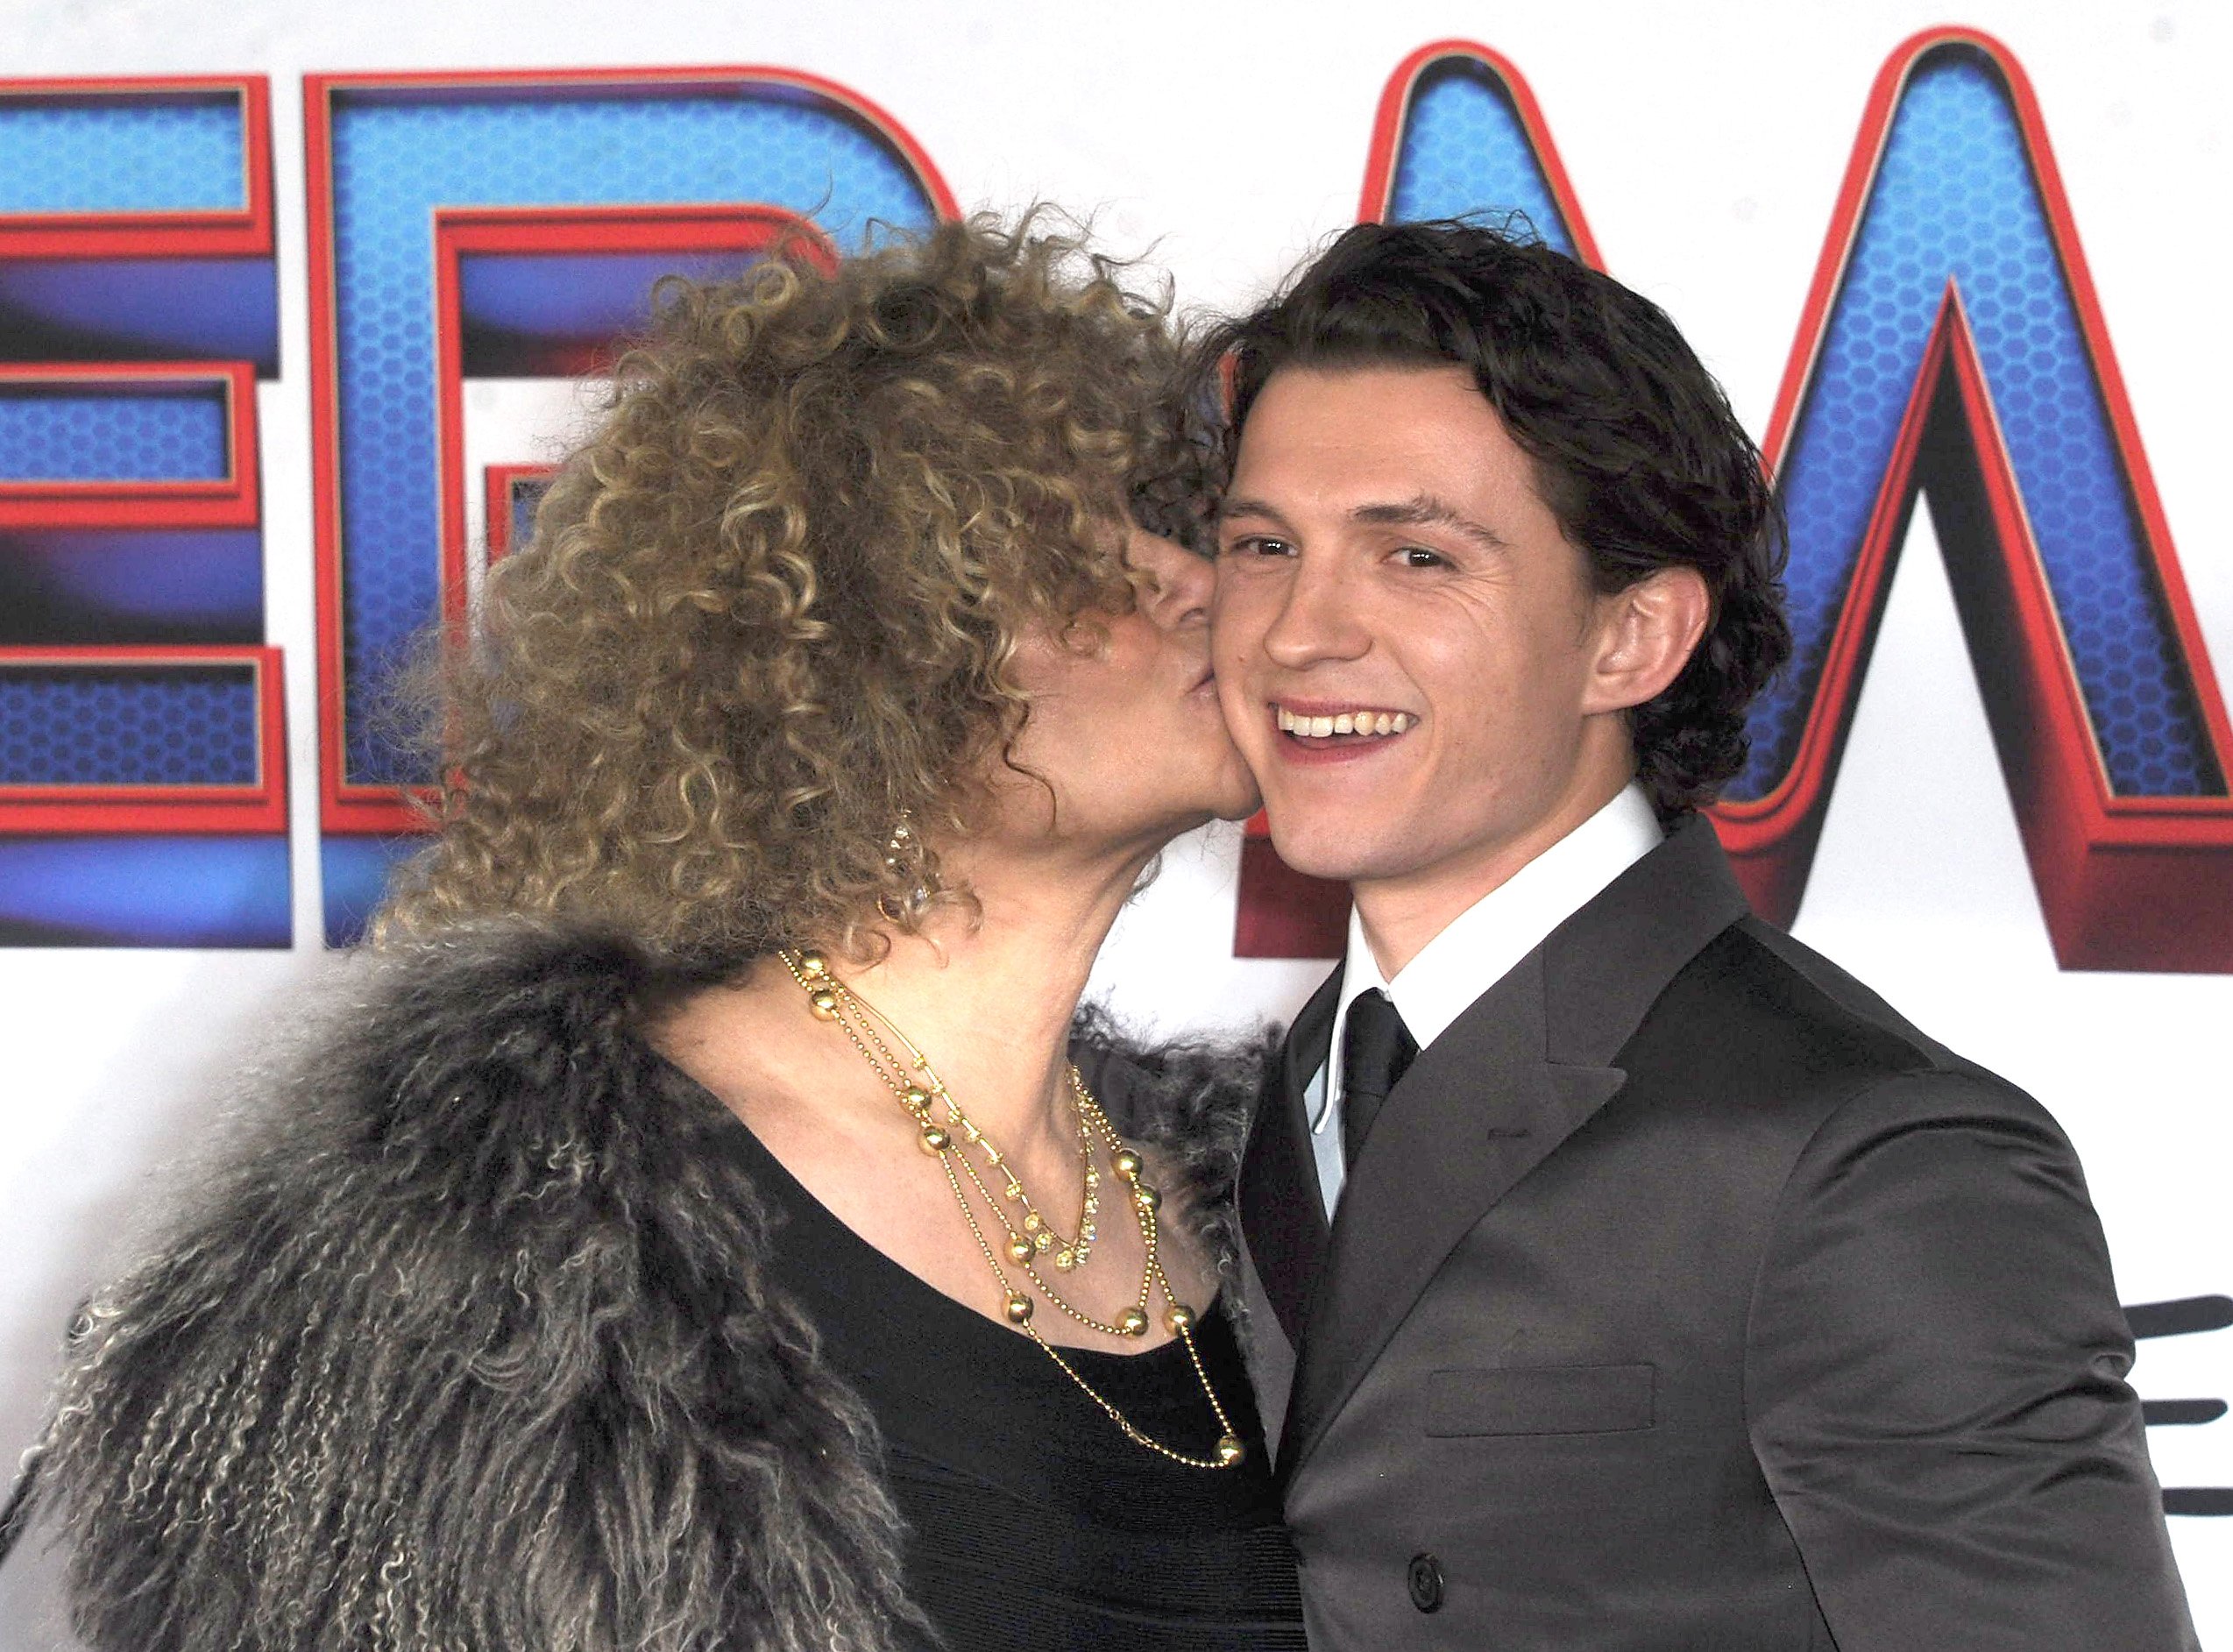 Amy Pascal, producer of 'Spider-Man: No Way Home,' kisses actor Tom Holland on the cheek on the red carpet for the premiere. Pascal wars a gray fluffy shawl over a black top and a gold necklace. Holland wears a dark gray suit over a white button-up shirt and black tie. Both Pascal and Holland are pushing for the Oscars to recognize 'Spider-Man: No Way Home.'